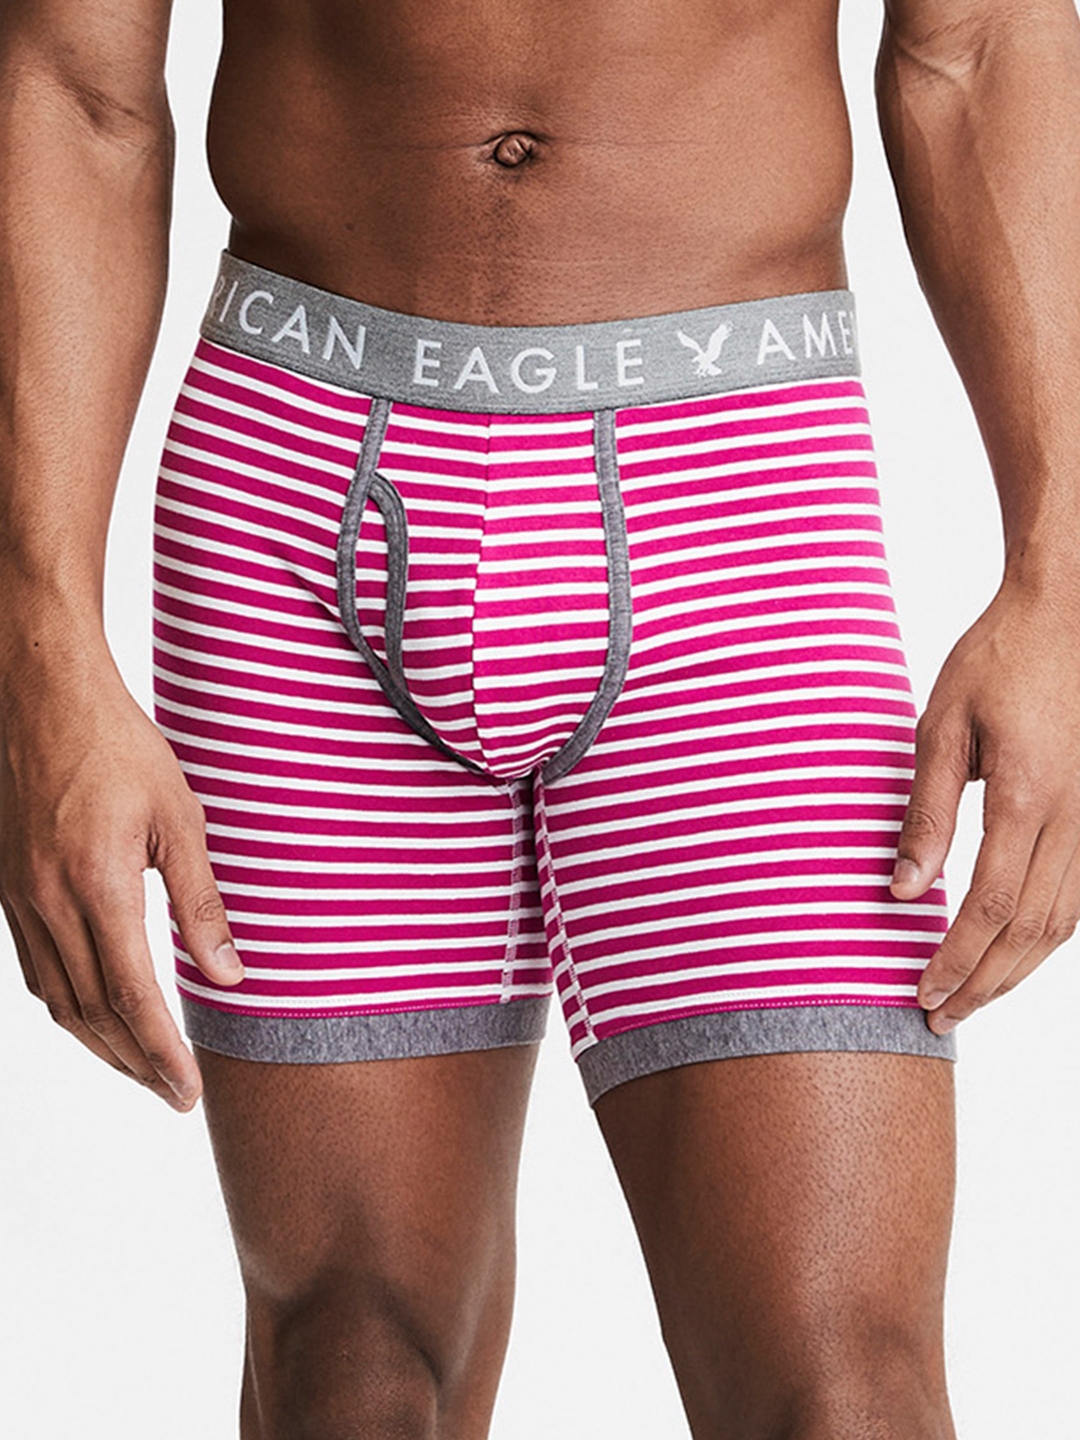 AMERICAN EAGLE OUTFITTERS Men Pink & White Striped Boxer Briefs 0005-600